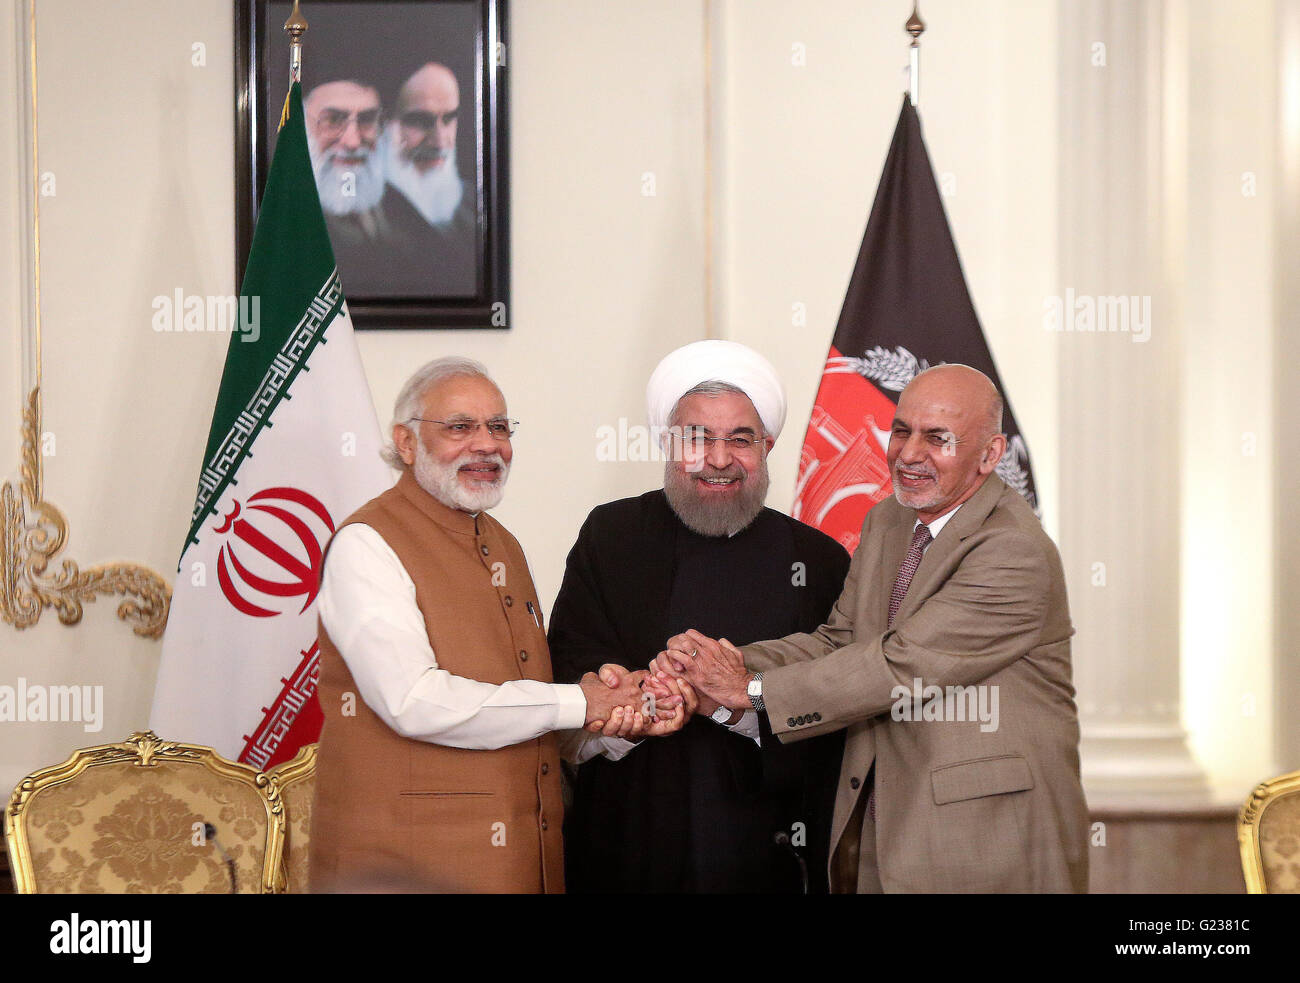 (160524) -- TEHRAN, May 24, 2016 (Xinhua) -- (From L to R) Indian Prime Minister Narendra Modi, Iranian President Hassan Rouhani and Afghan President Ashraf Ghani shake hands after their meeting at Saadabad Palace in Tehran, Iran, on May 23, 2016. Iran, India and Afghanistan signed a trilateral deal here on Monday to boost their regional trade and economic cooperation. The agreement, signed in the presence of Iranian President Hassan Rouhani, Indian Prime Minister Narendra Modi and Afghan President Ashraf Ghani, is to develop Iran's Chabahar port, which would serve as a transit route connectin Stock Photo